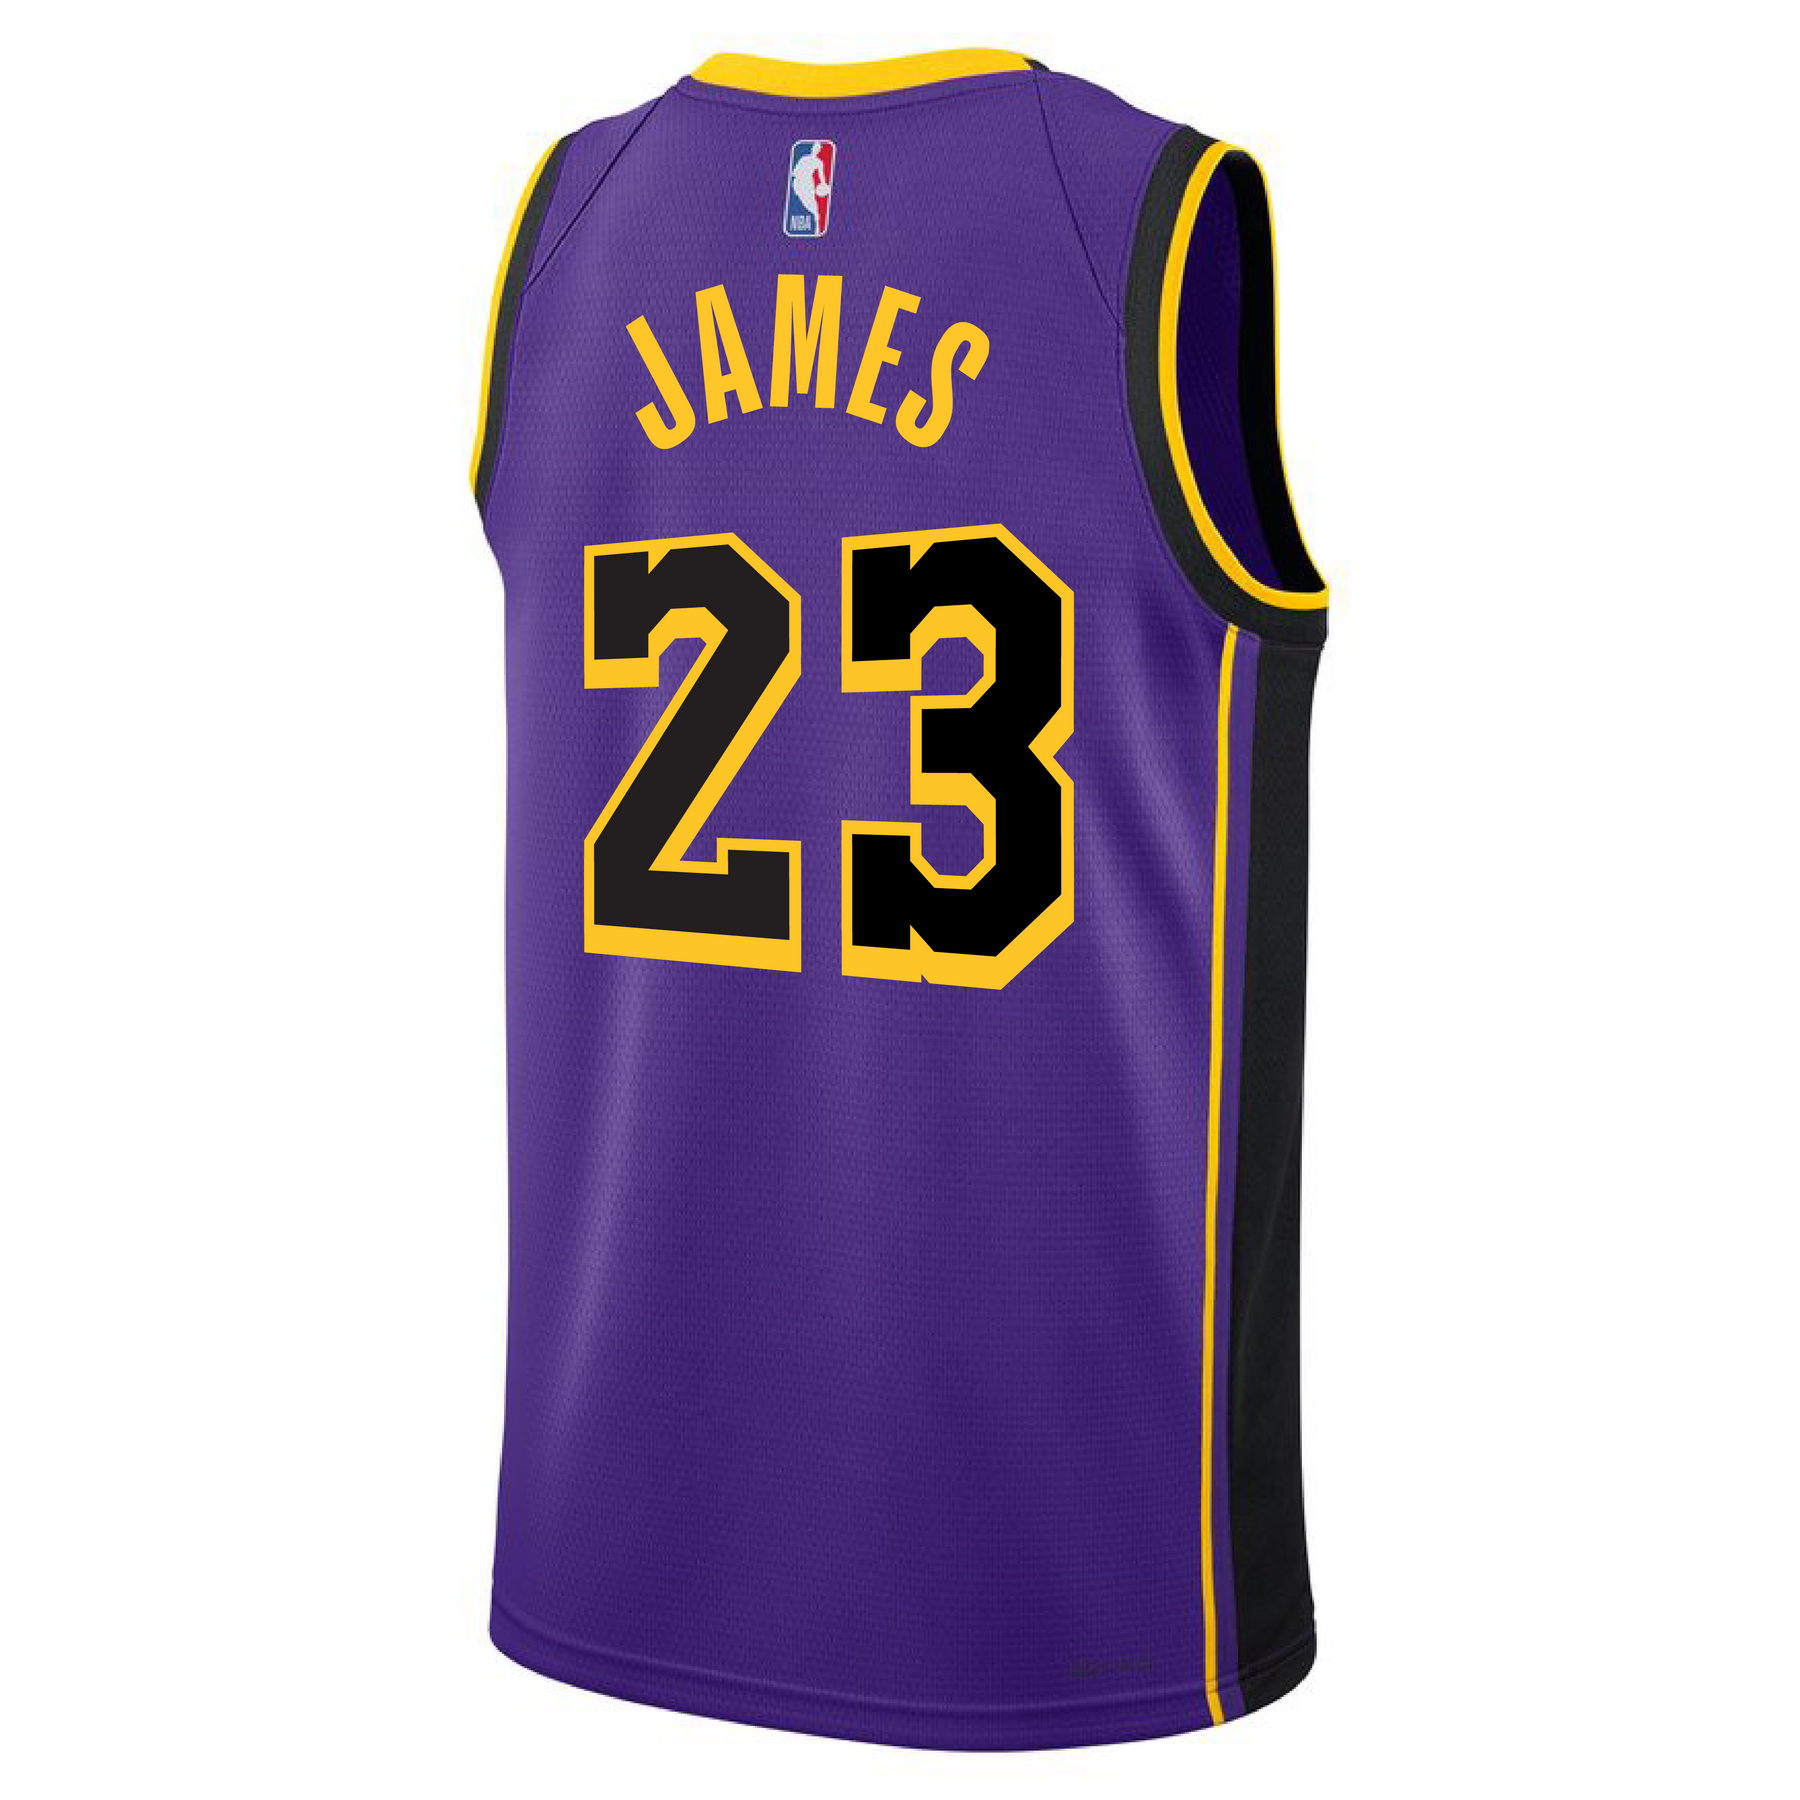 Lebron James #6 YOUTH Los Angeles Lakers jersey white – Classic Authentics